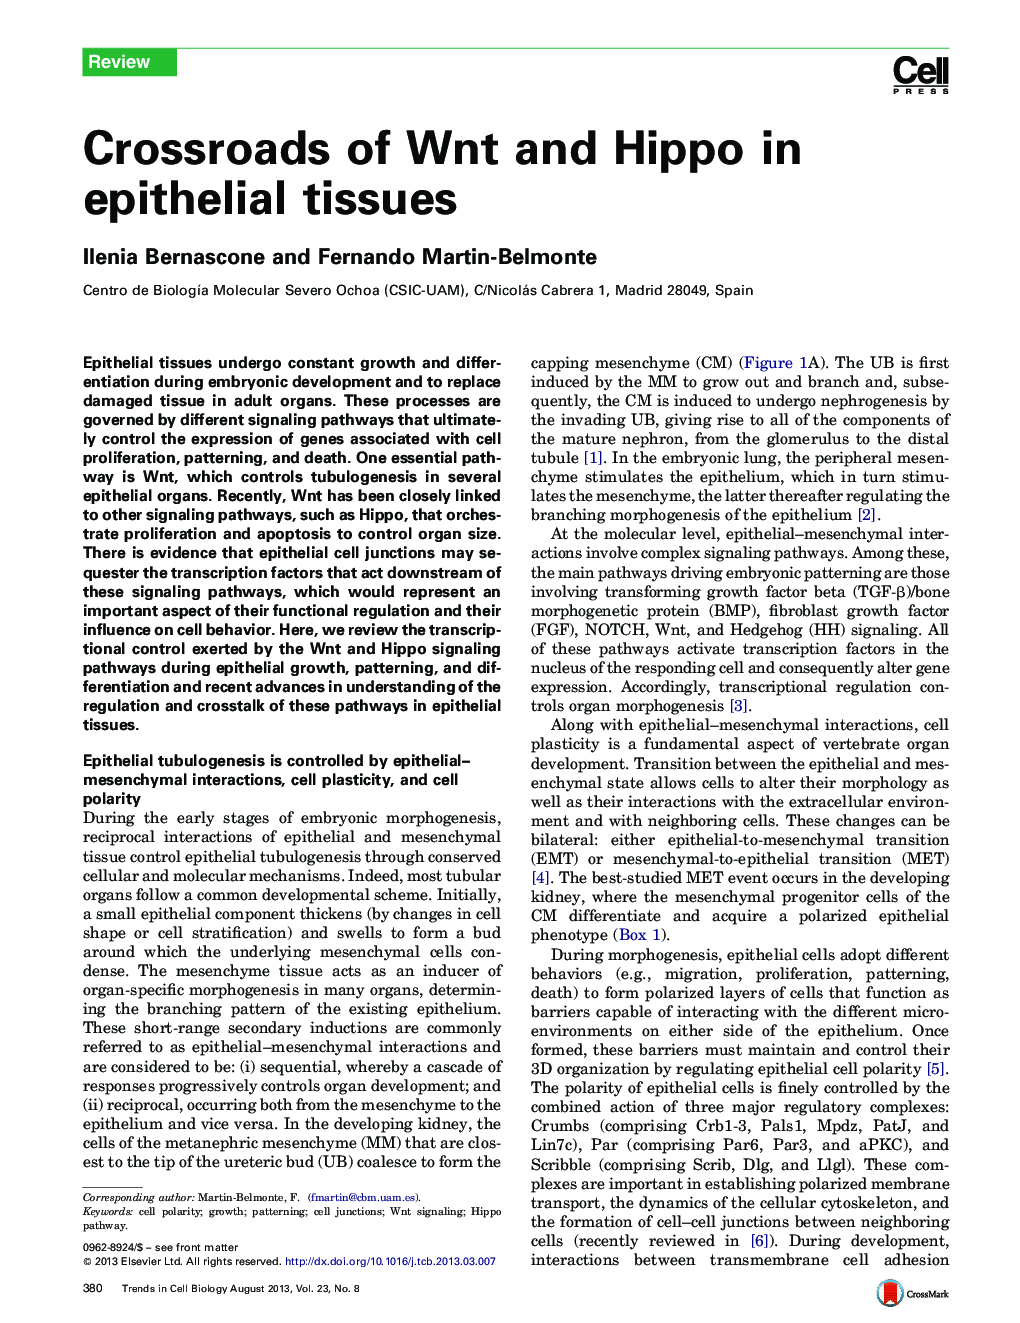 Crossroads of Wnt and Hippo in epithelial tissues